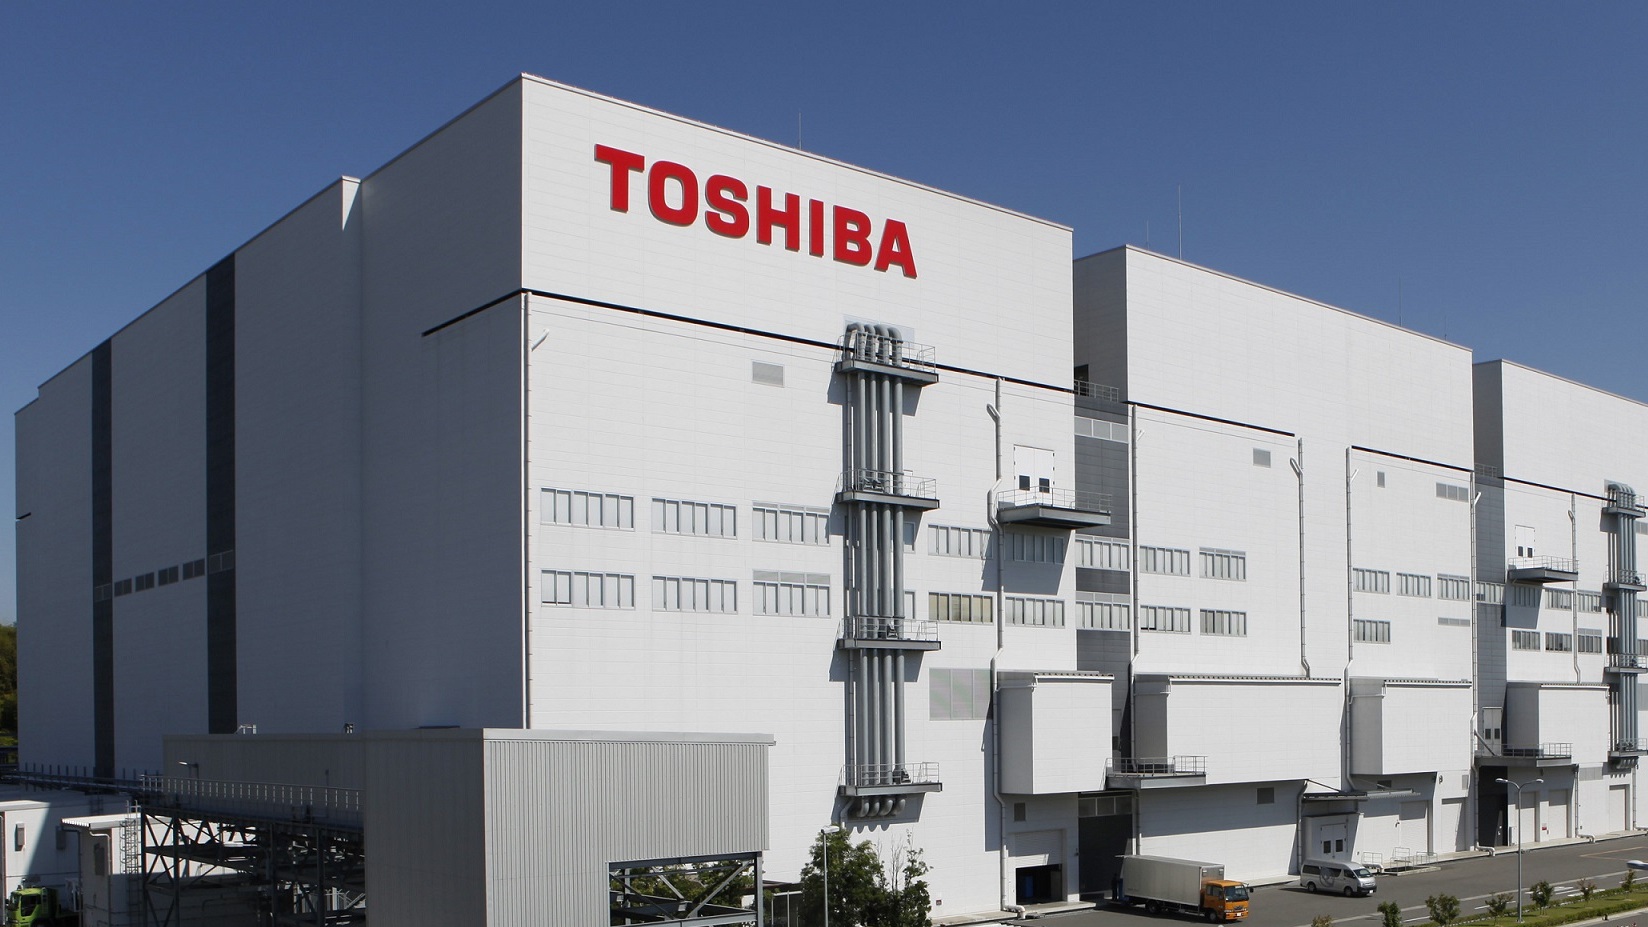 End of era as Toshiba completes $13.5 bn offer to go private